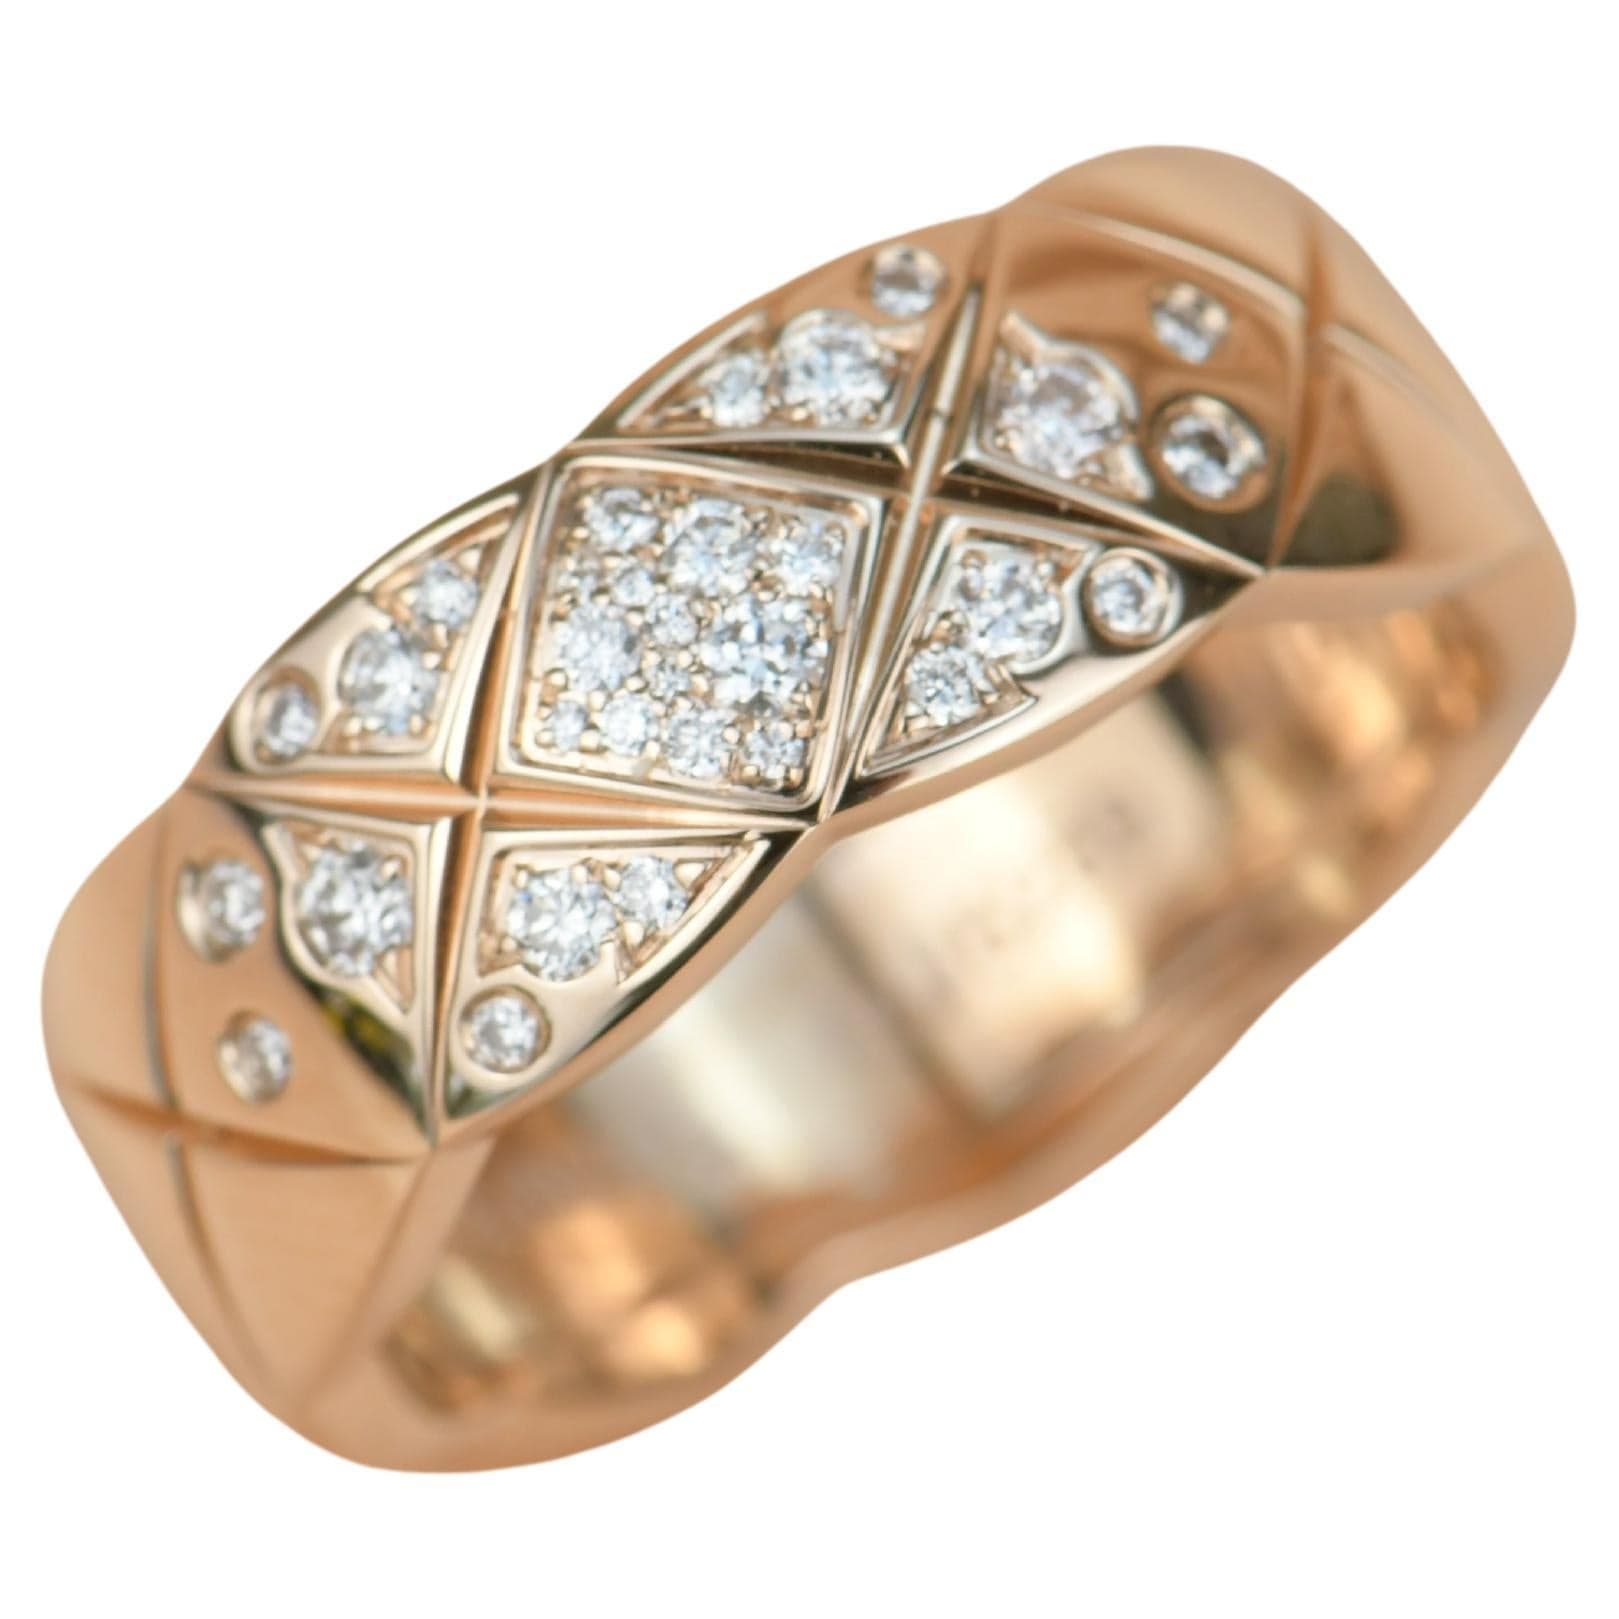 Chanel Chanel Small Rose Gold Diamond Coco Crush Ring AHC1430